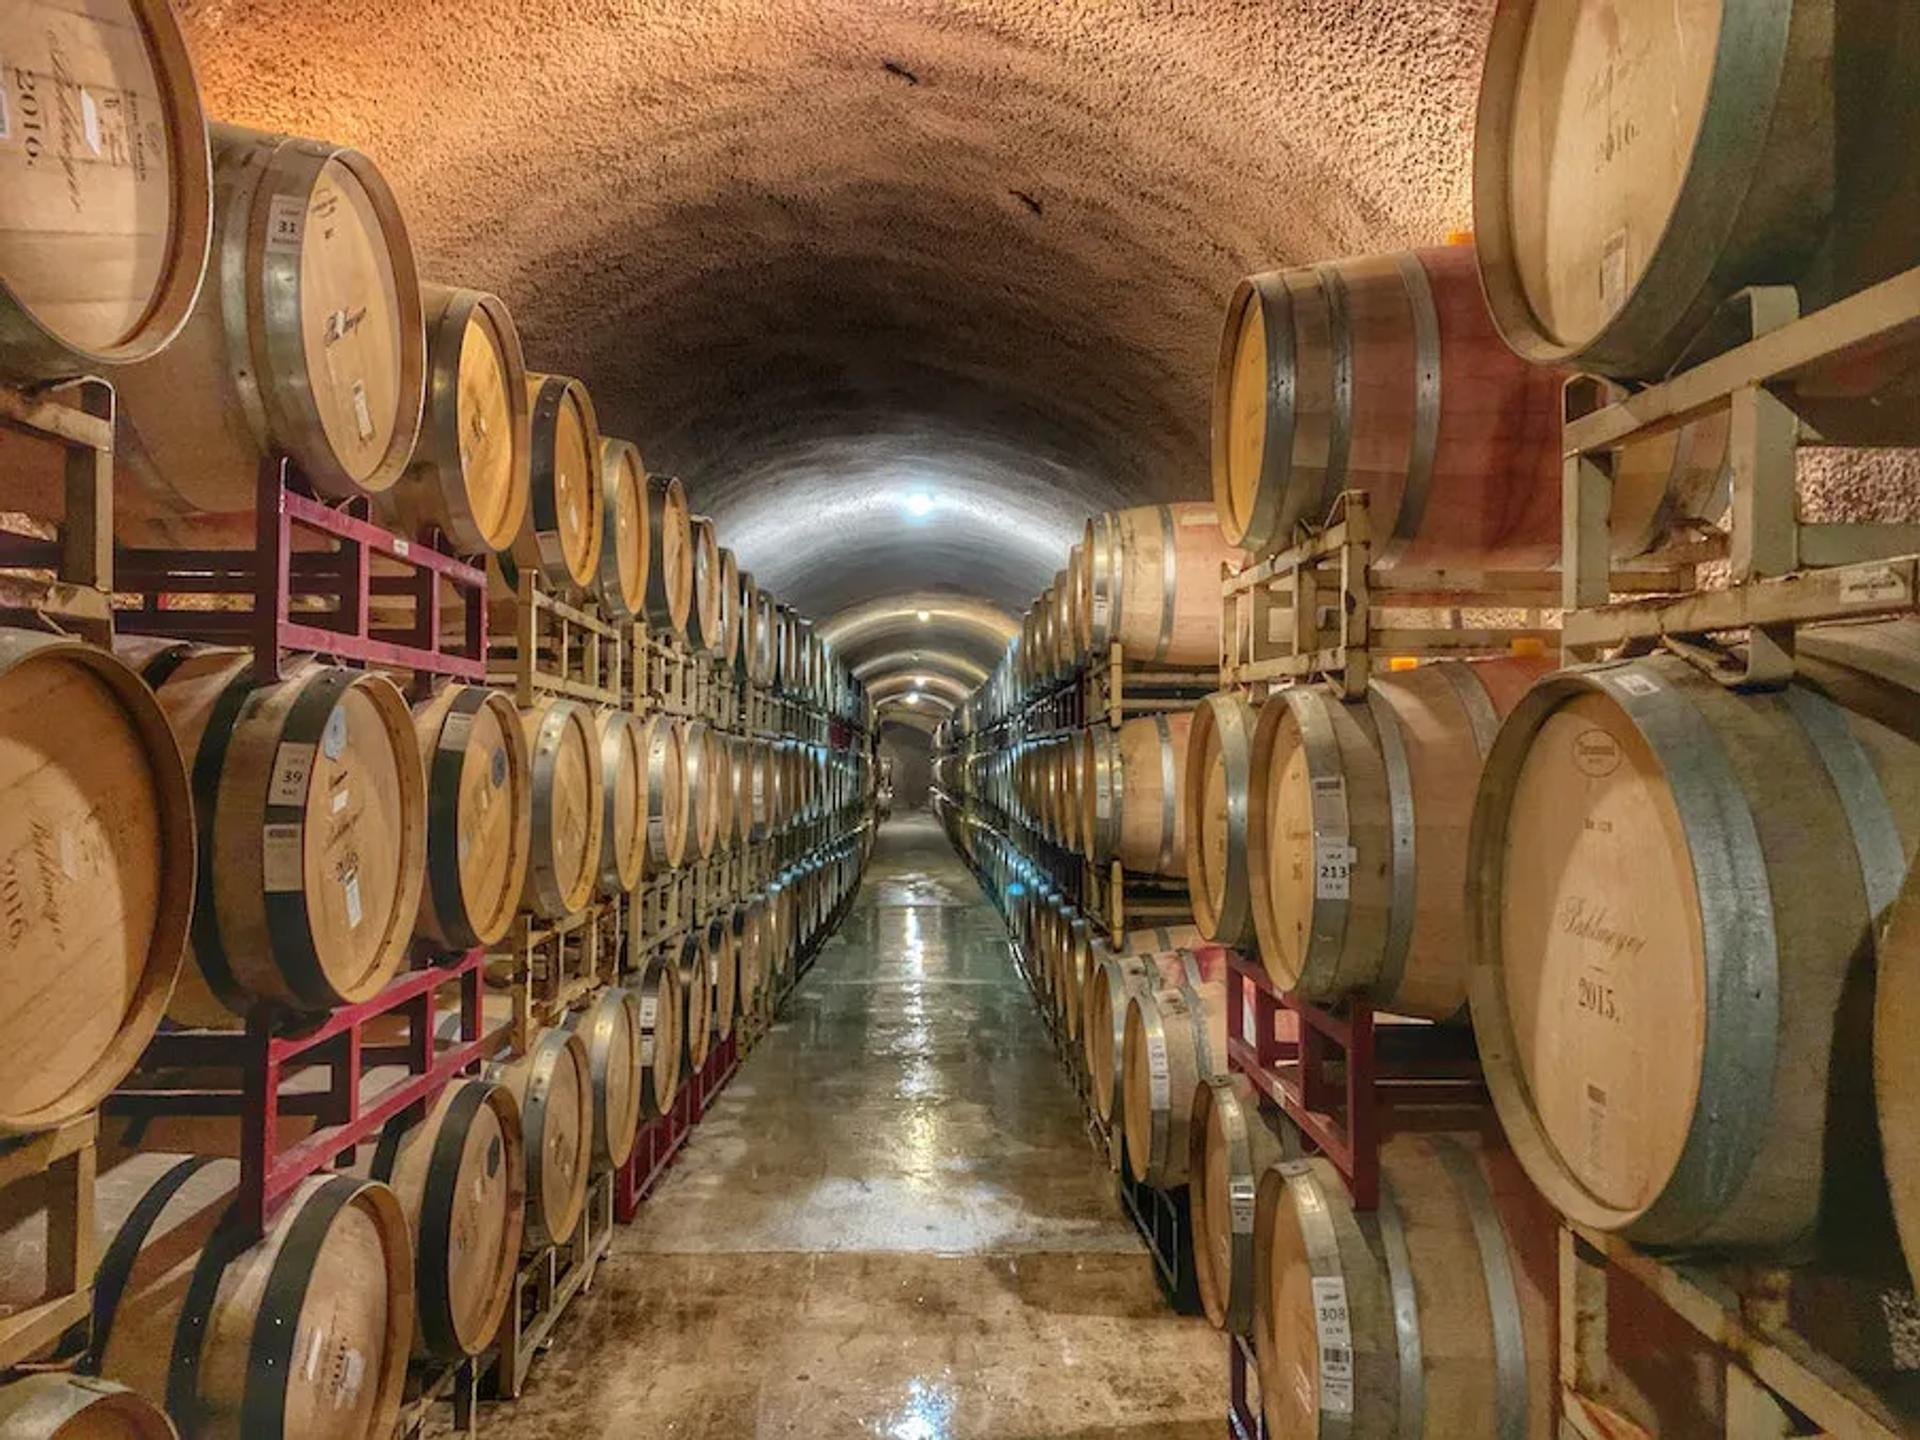 A wine cellar with many barrels of wine